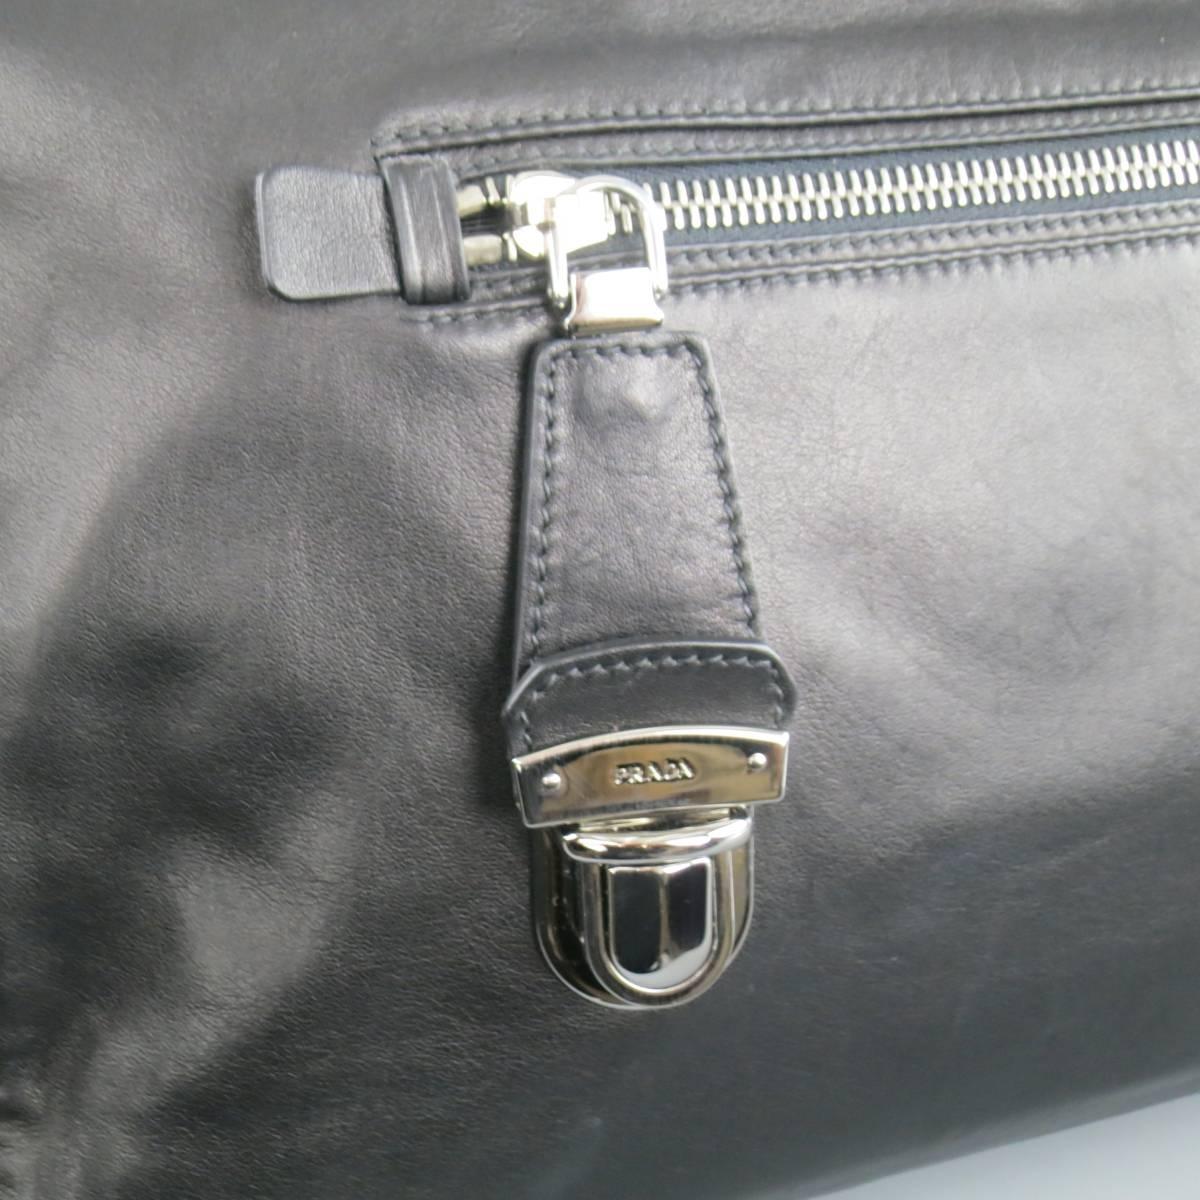 PRADA handbag in black smooth leather featuring a frontal zip pocket with silver tone snap tab, side hardware with optional shoulder strap, side logo plaque, and double covered top handles. Made in Italy. AD 2010.
 
Good Pre-Owned Condition.
